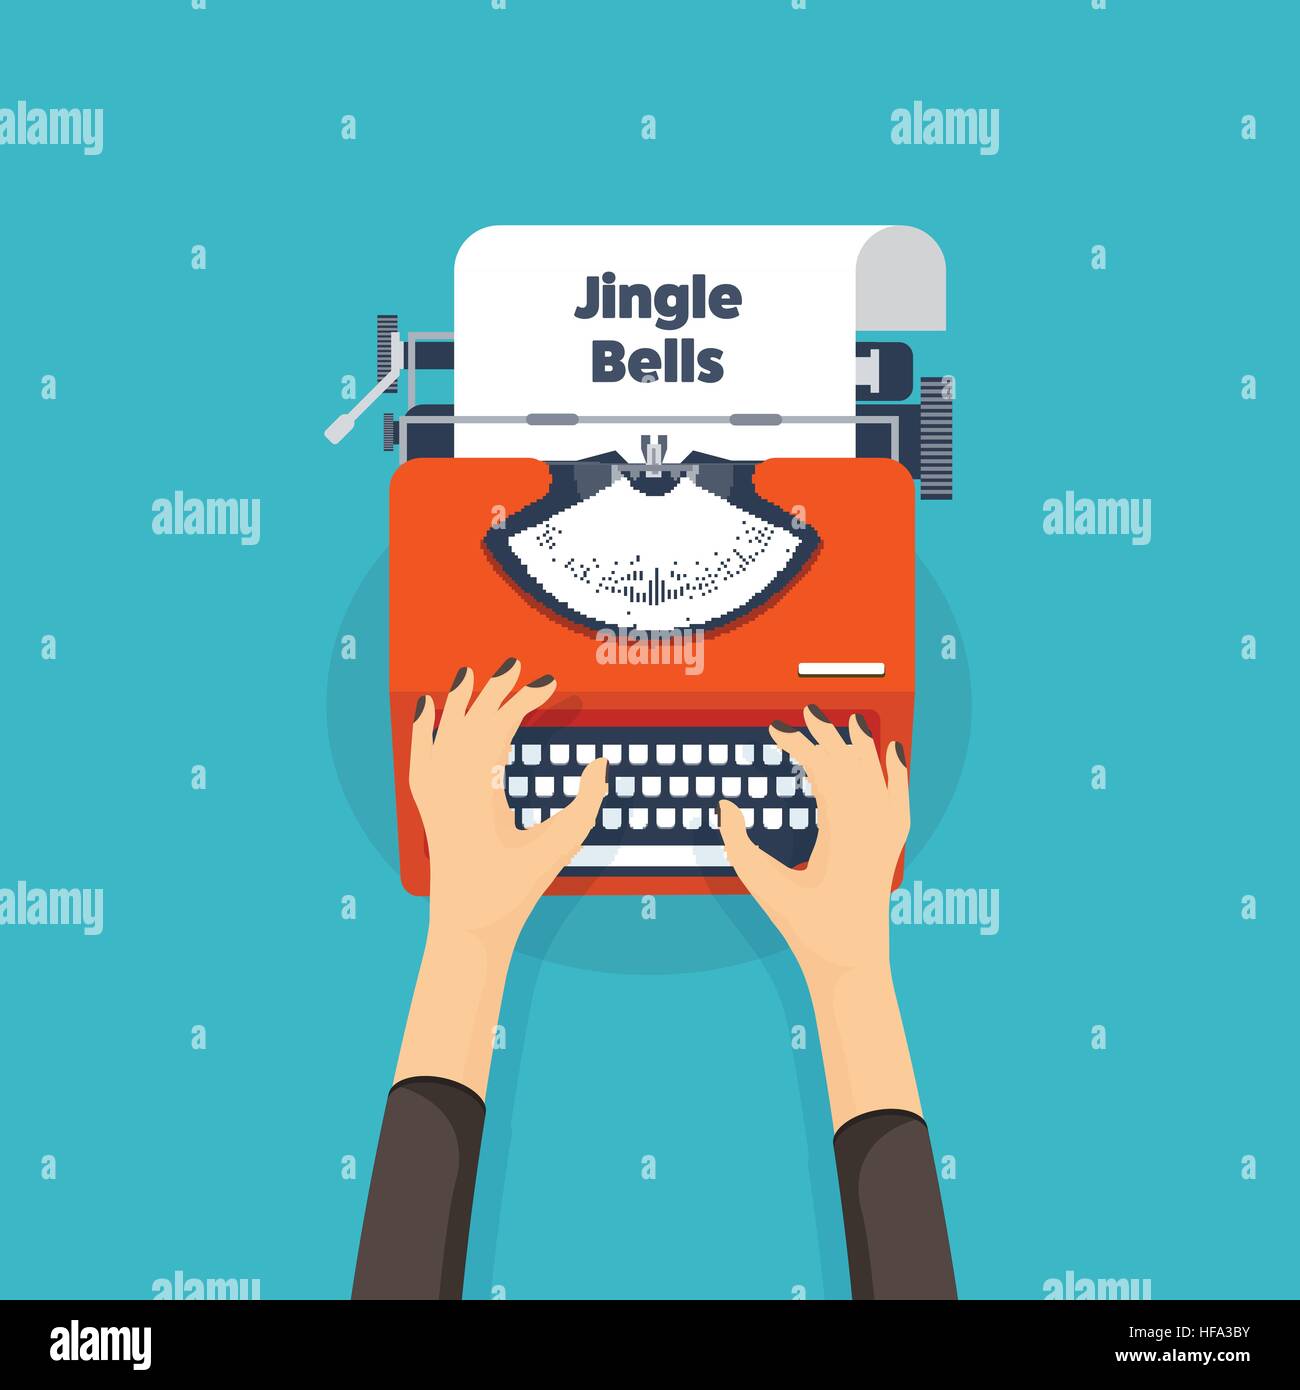 Typewriter in a flat style. Christmas wish list. Letter to Santa. New year. 2017. December holidays. Jingle bells. Stock Vector